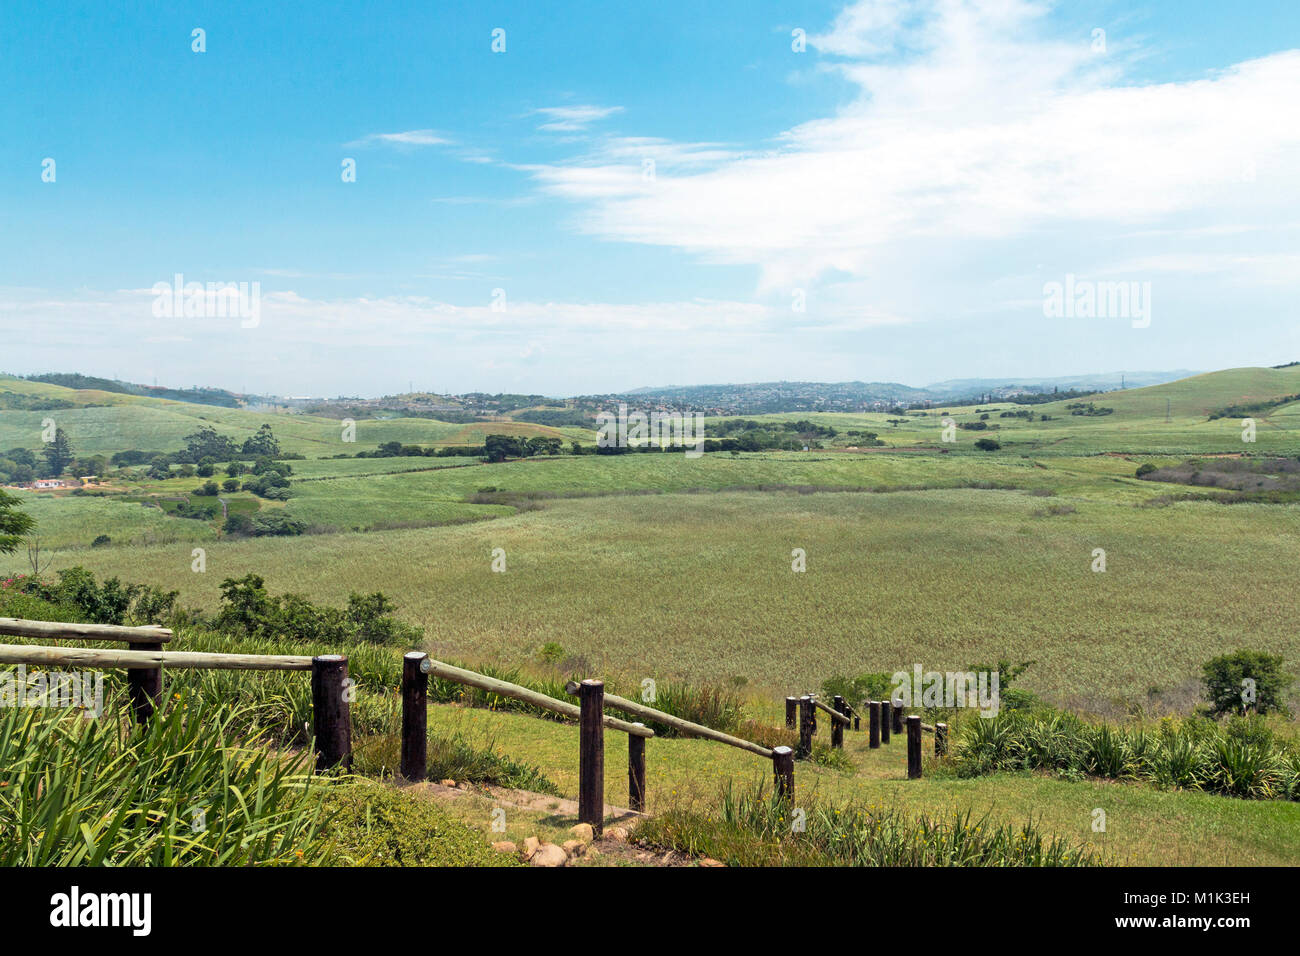 Wooden pole barrier fenced walkway , green vegetation and sugar cane plantations against distant Durban blue cloudy  skyline at Mount Moreland Stock Photo